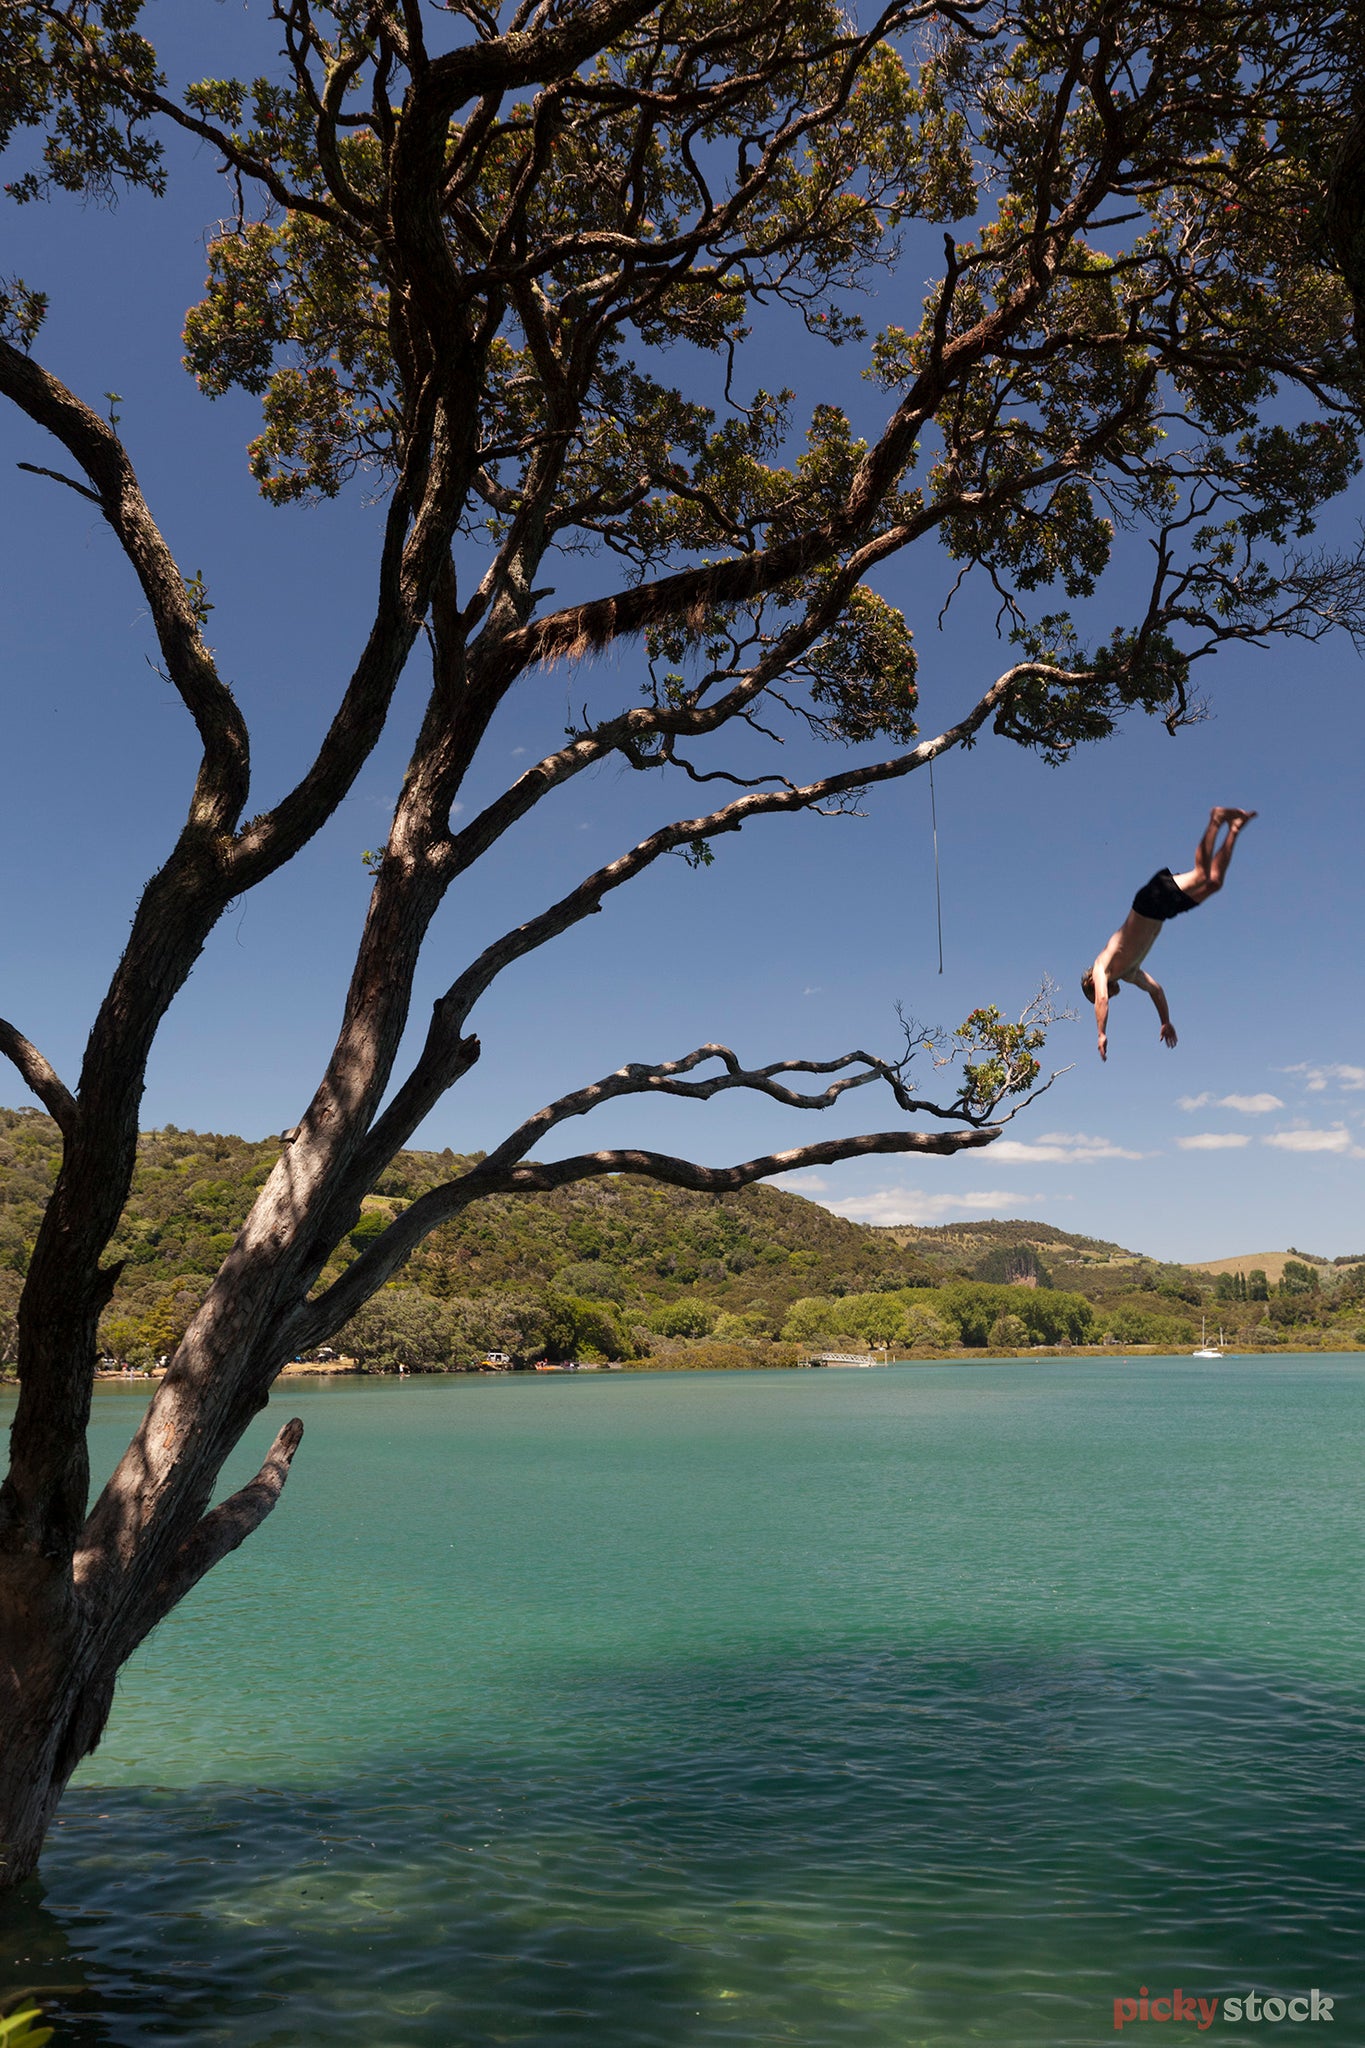 Boy diving from pōhutakawa into estuary. Water is green and bright. Sky is blue. 